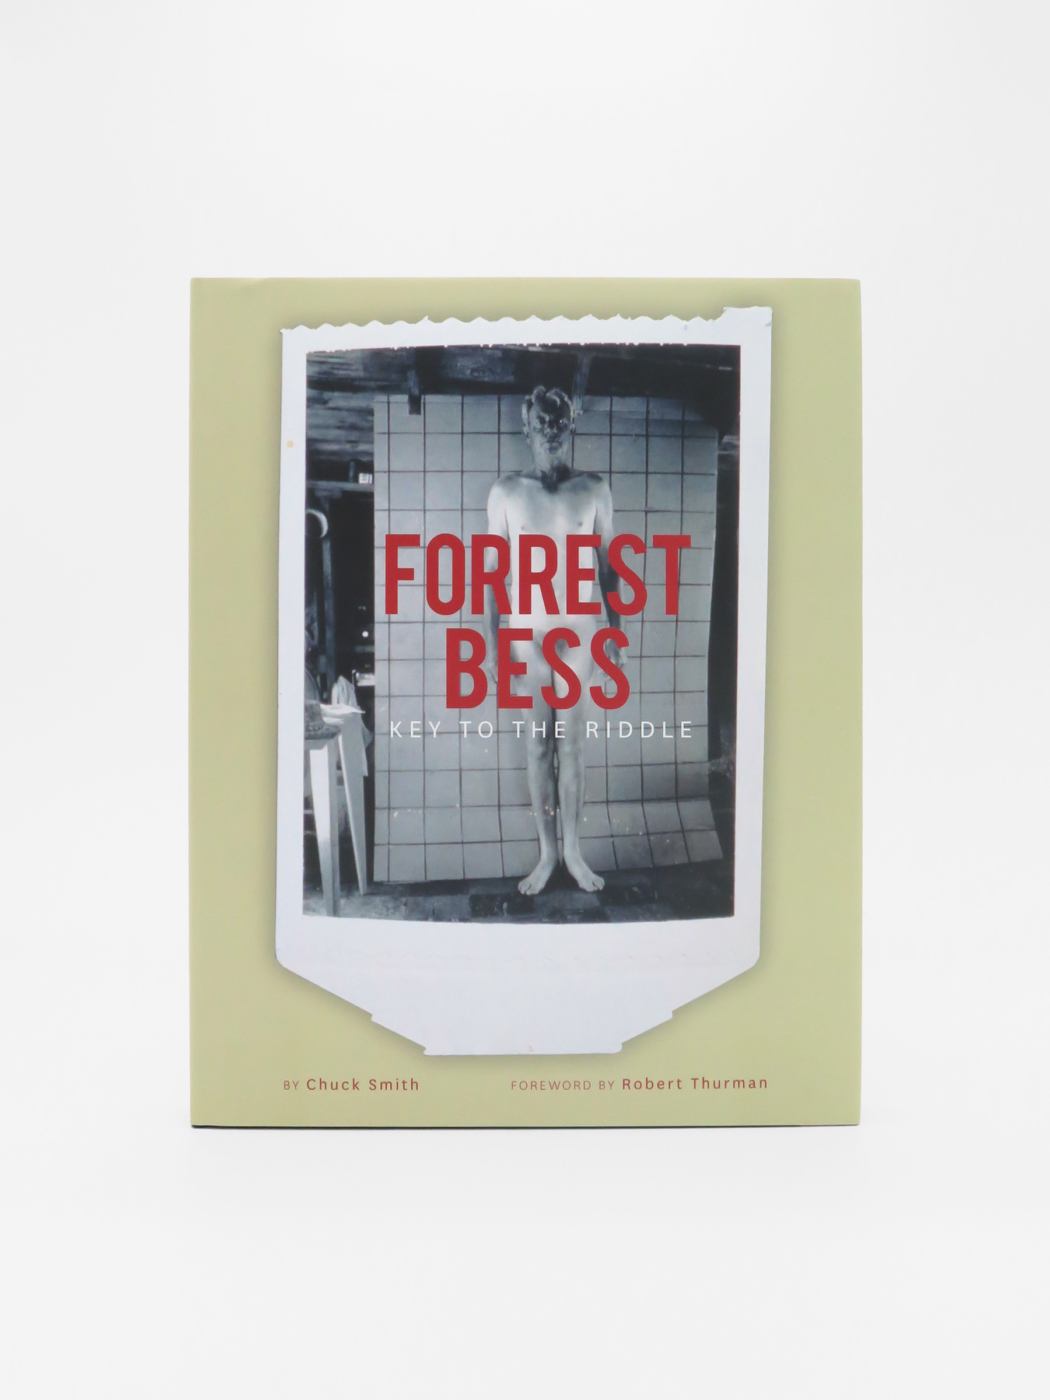 Forrest Bess, Key To The Riddle